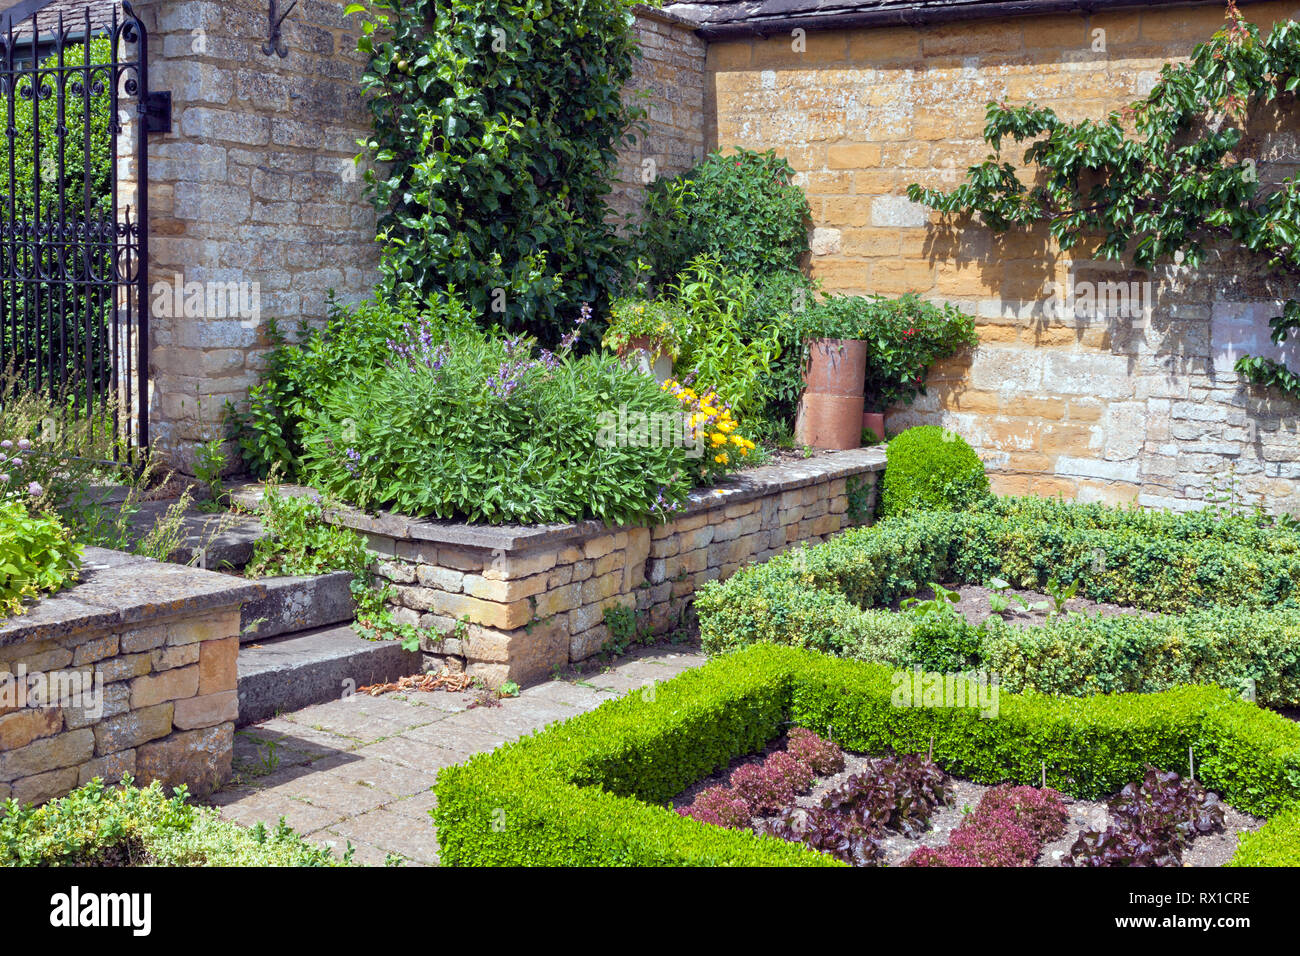 Summer vegetable and herb garden with lettuce growing in plots enclosed by trimmed hedge, herbs and fruit trees by the stone wall . Stock Photo